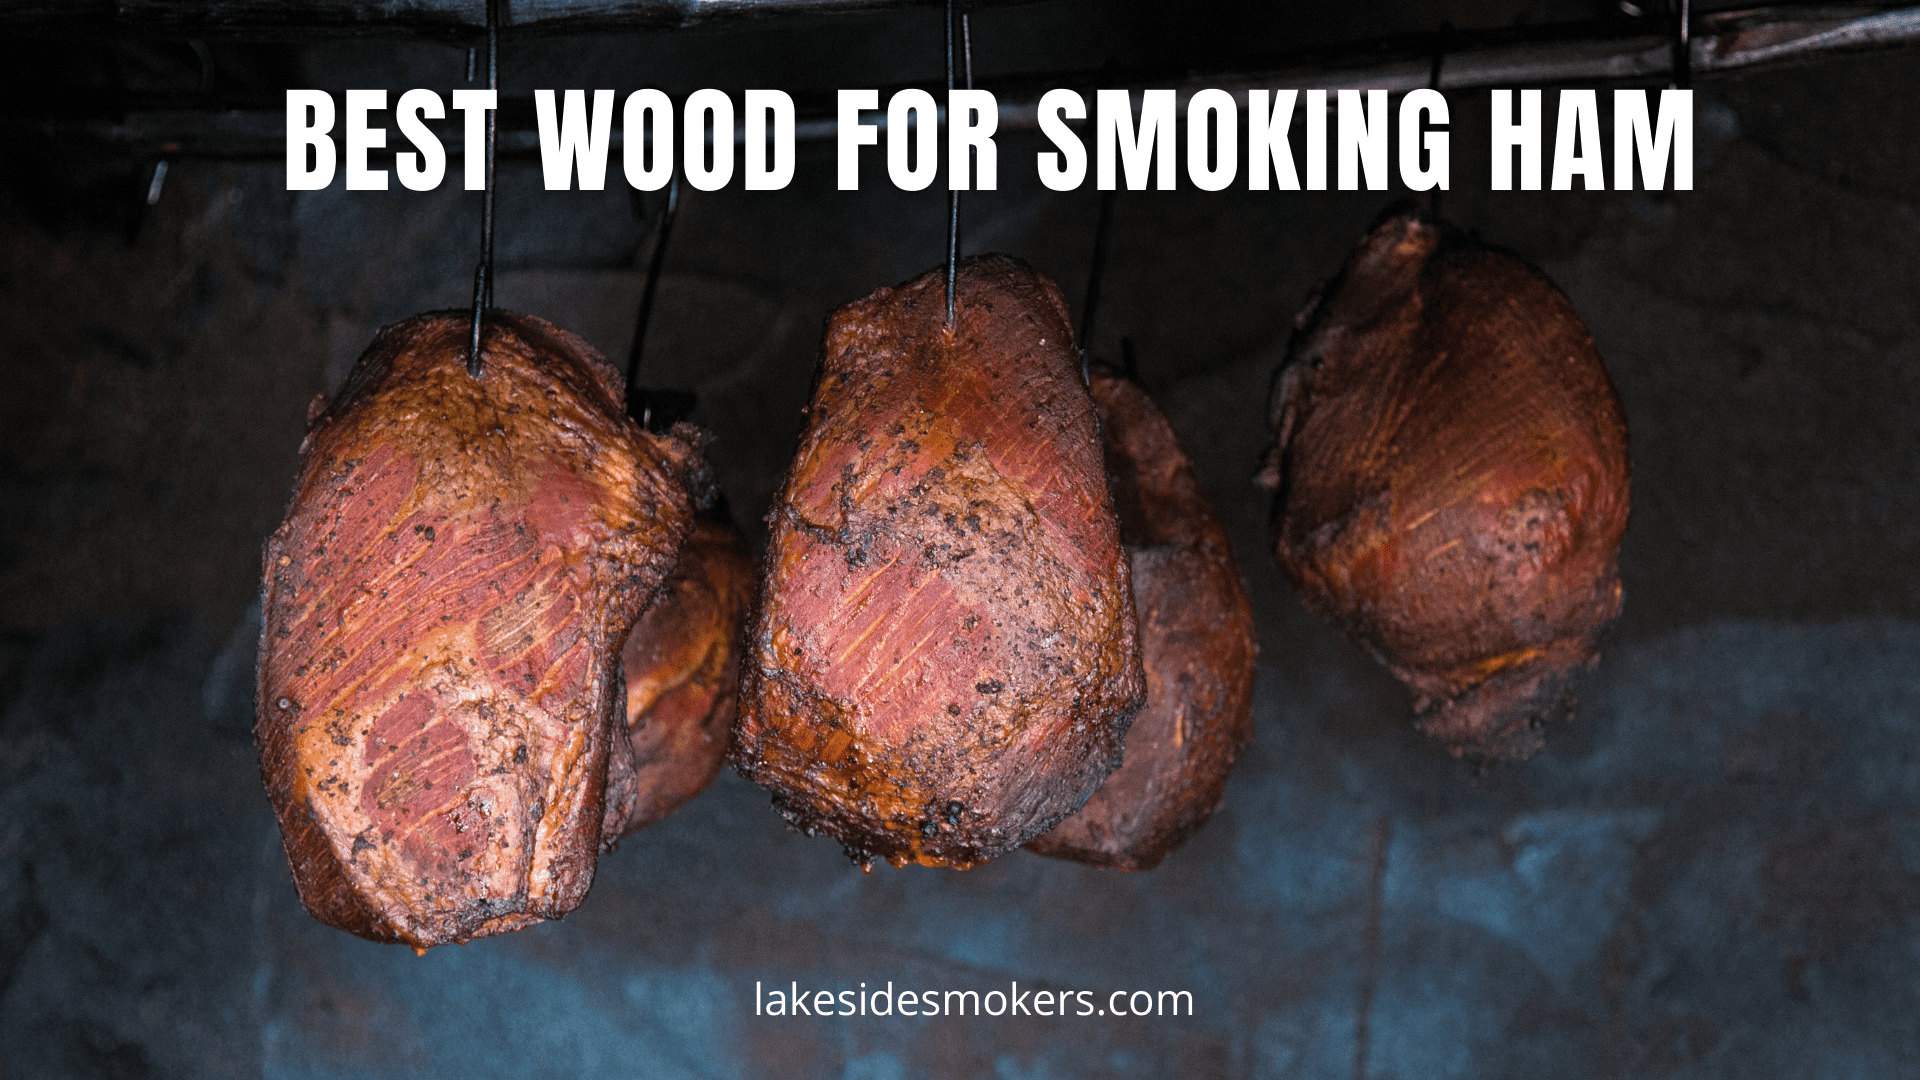 Best wood for smoking ham | Make it the real deal with these choices